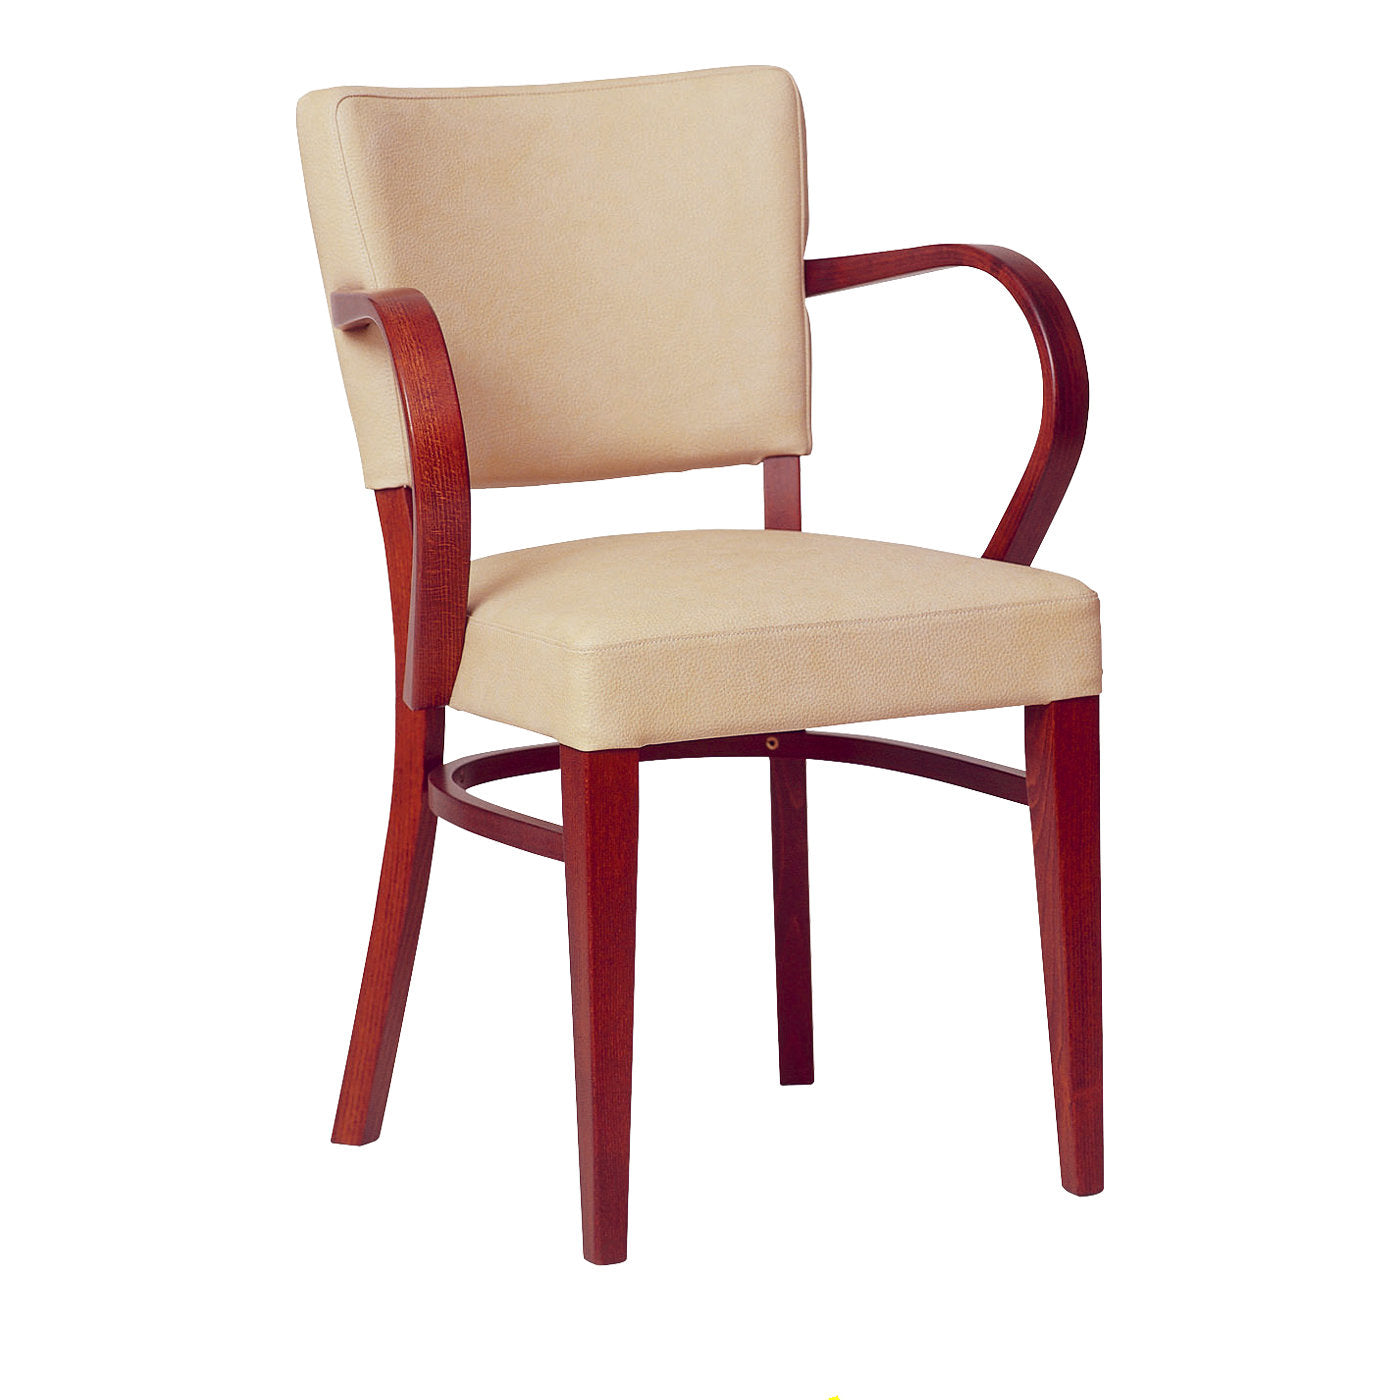 Marsiglia Red and Beige Lounge Chair - Main view